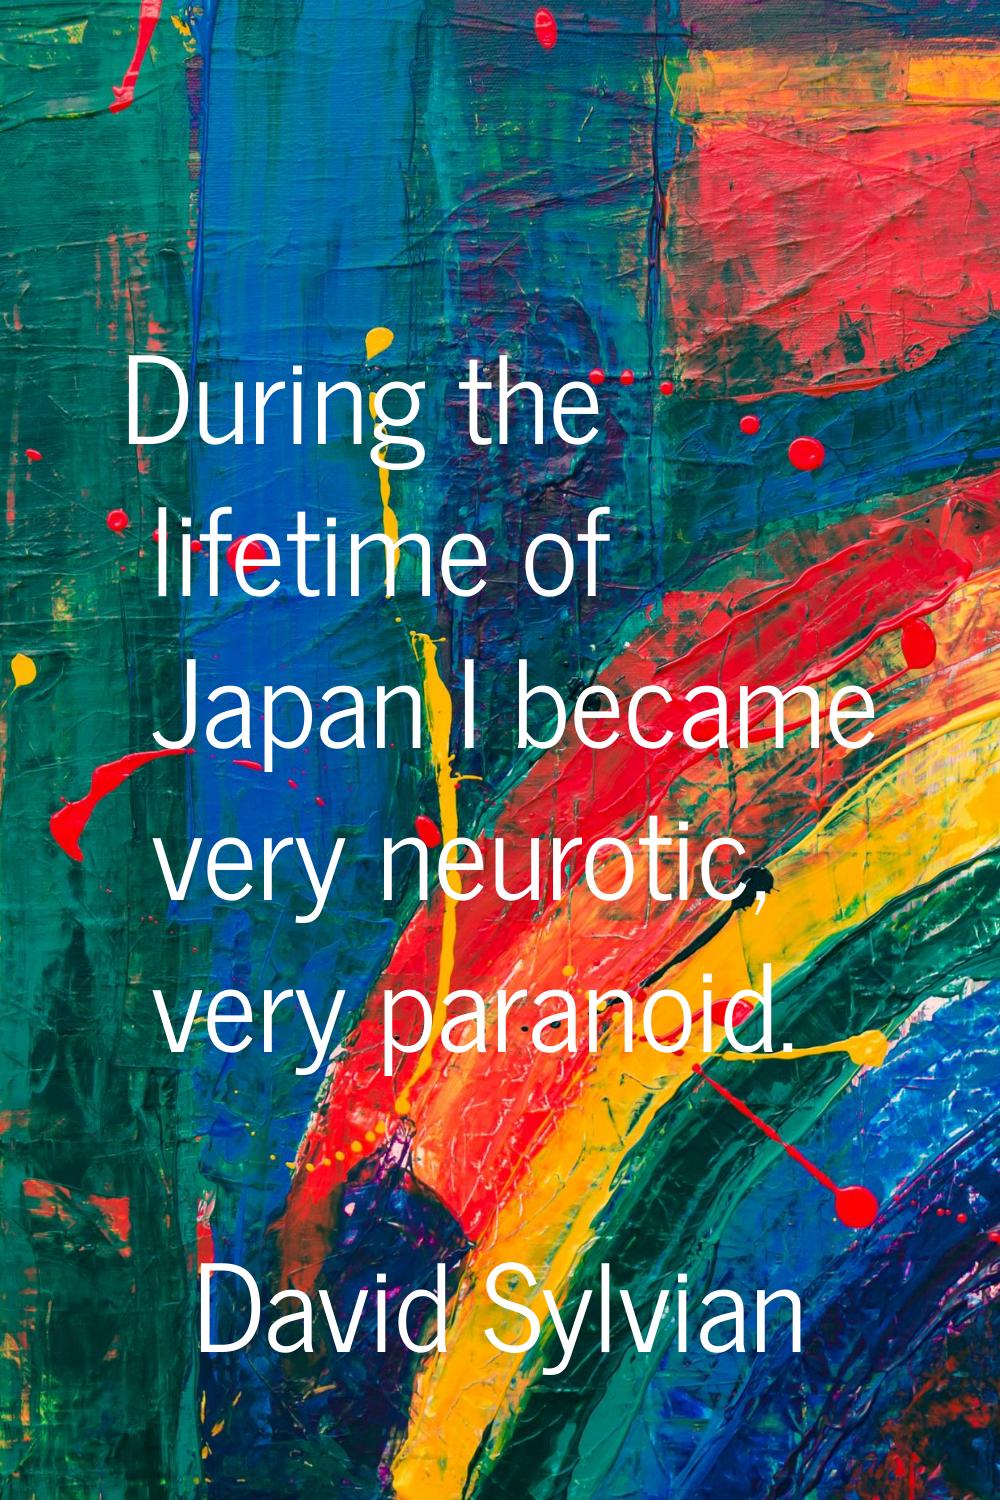 During the lifetime of Japan I became very neurotic, very paranoid.